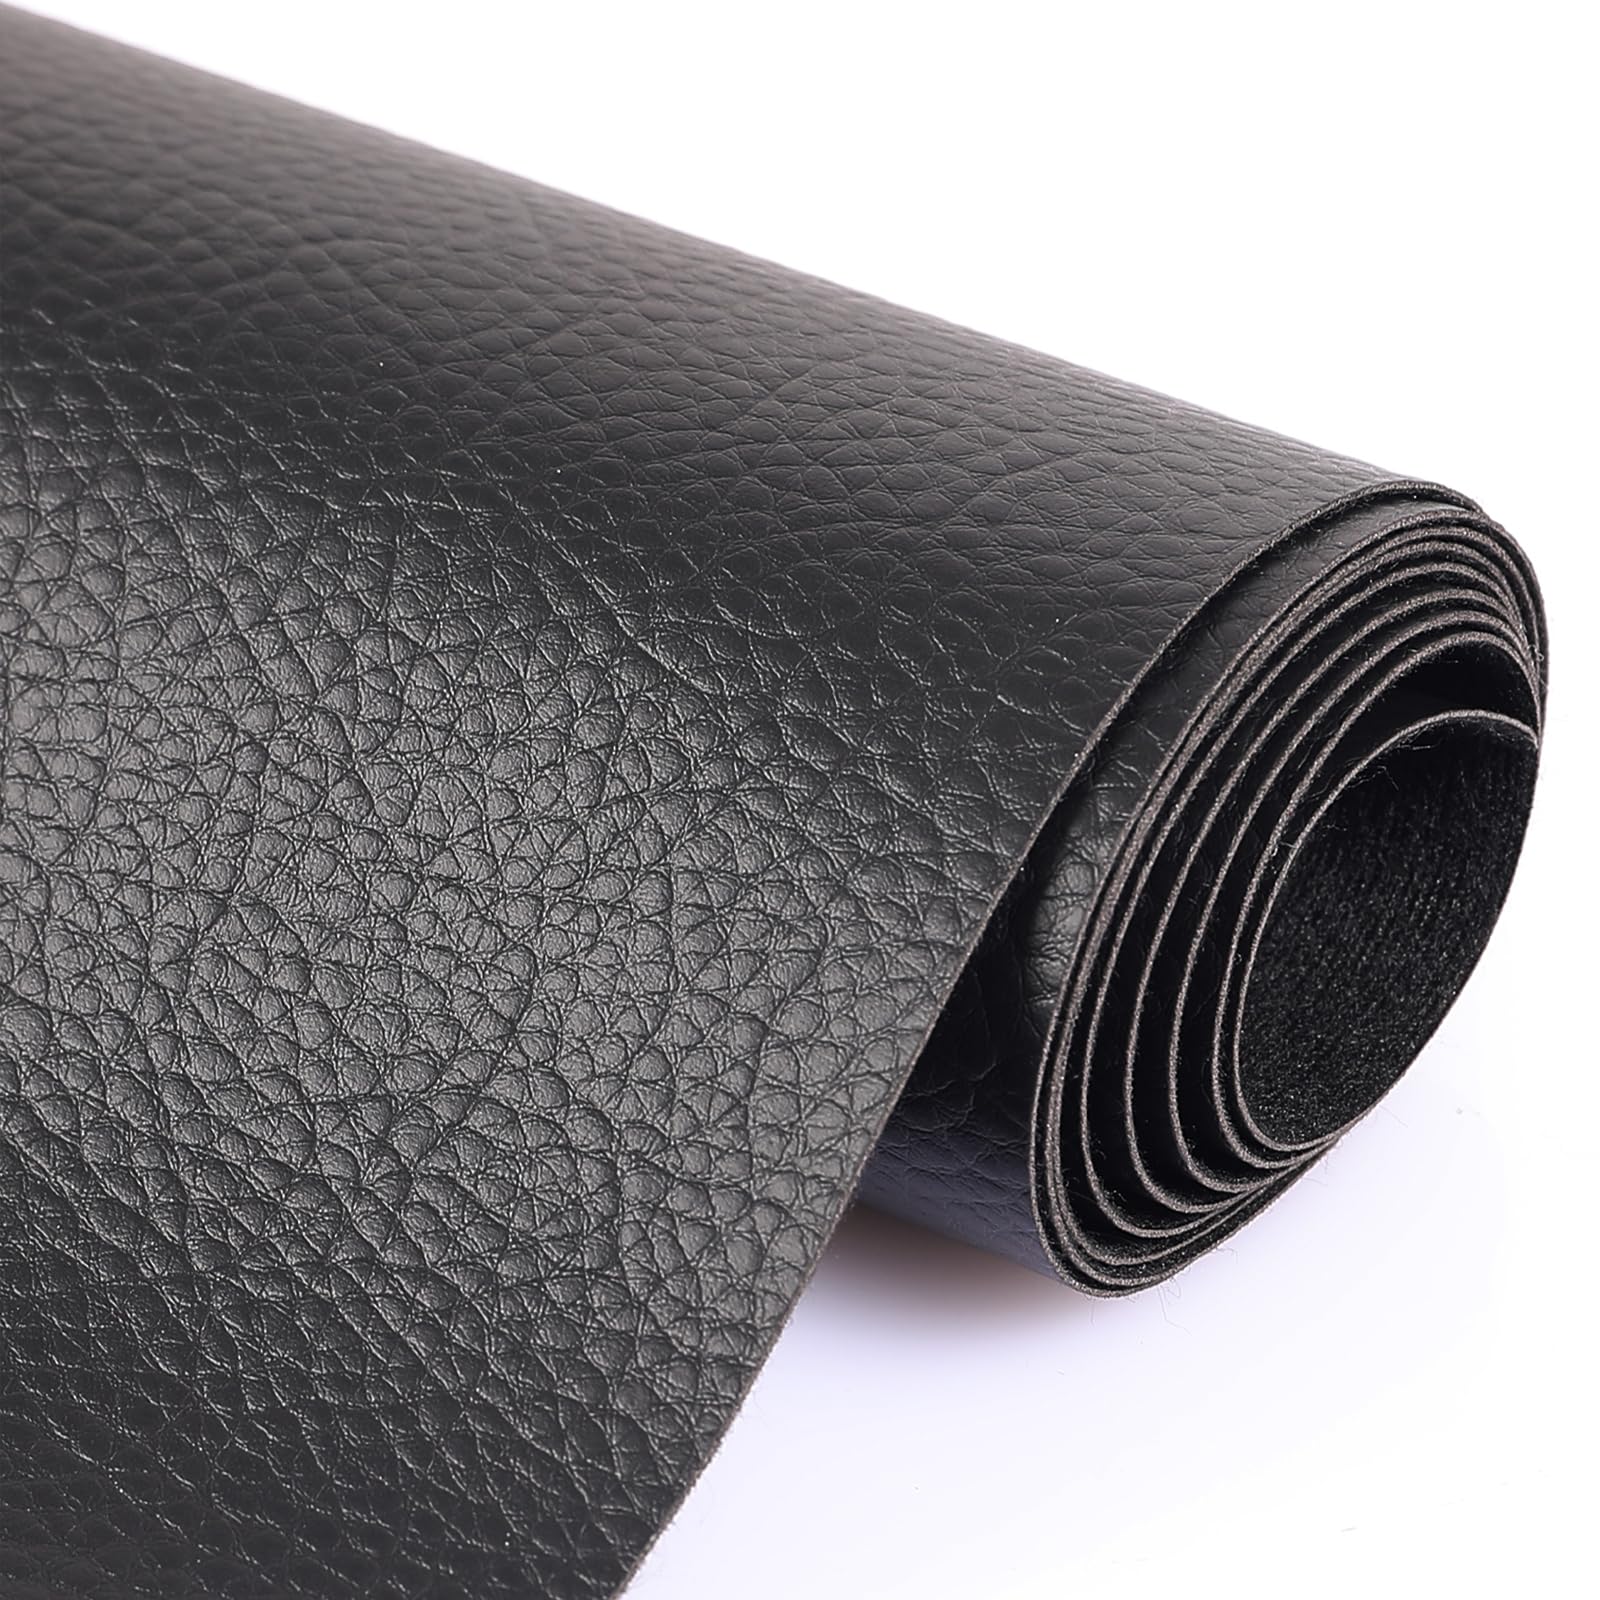 Osunnus Faux Leather Upholstery Fabric by The Yard Vinyl Fabric 55" Wide Outdoor PU Leather Sheets for Home Decor DIY Crafts Chair Furniture Car Marine Upholstery, 1 Yard Black